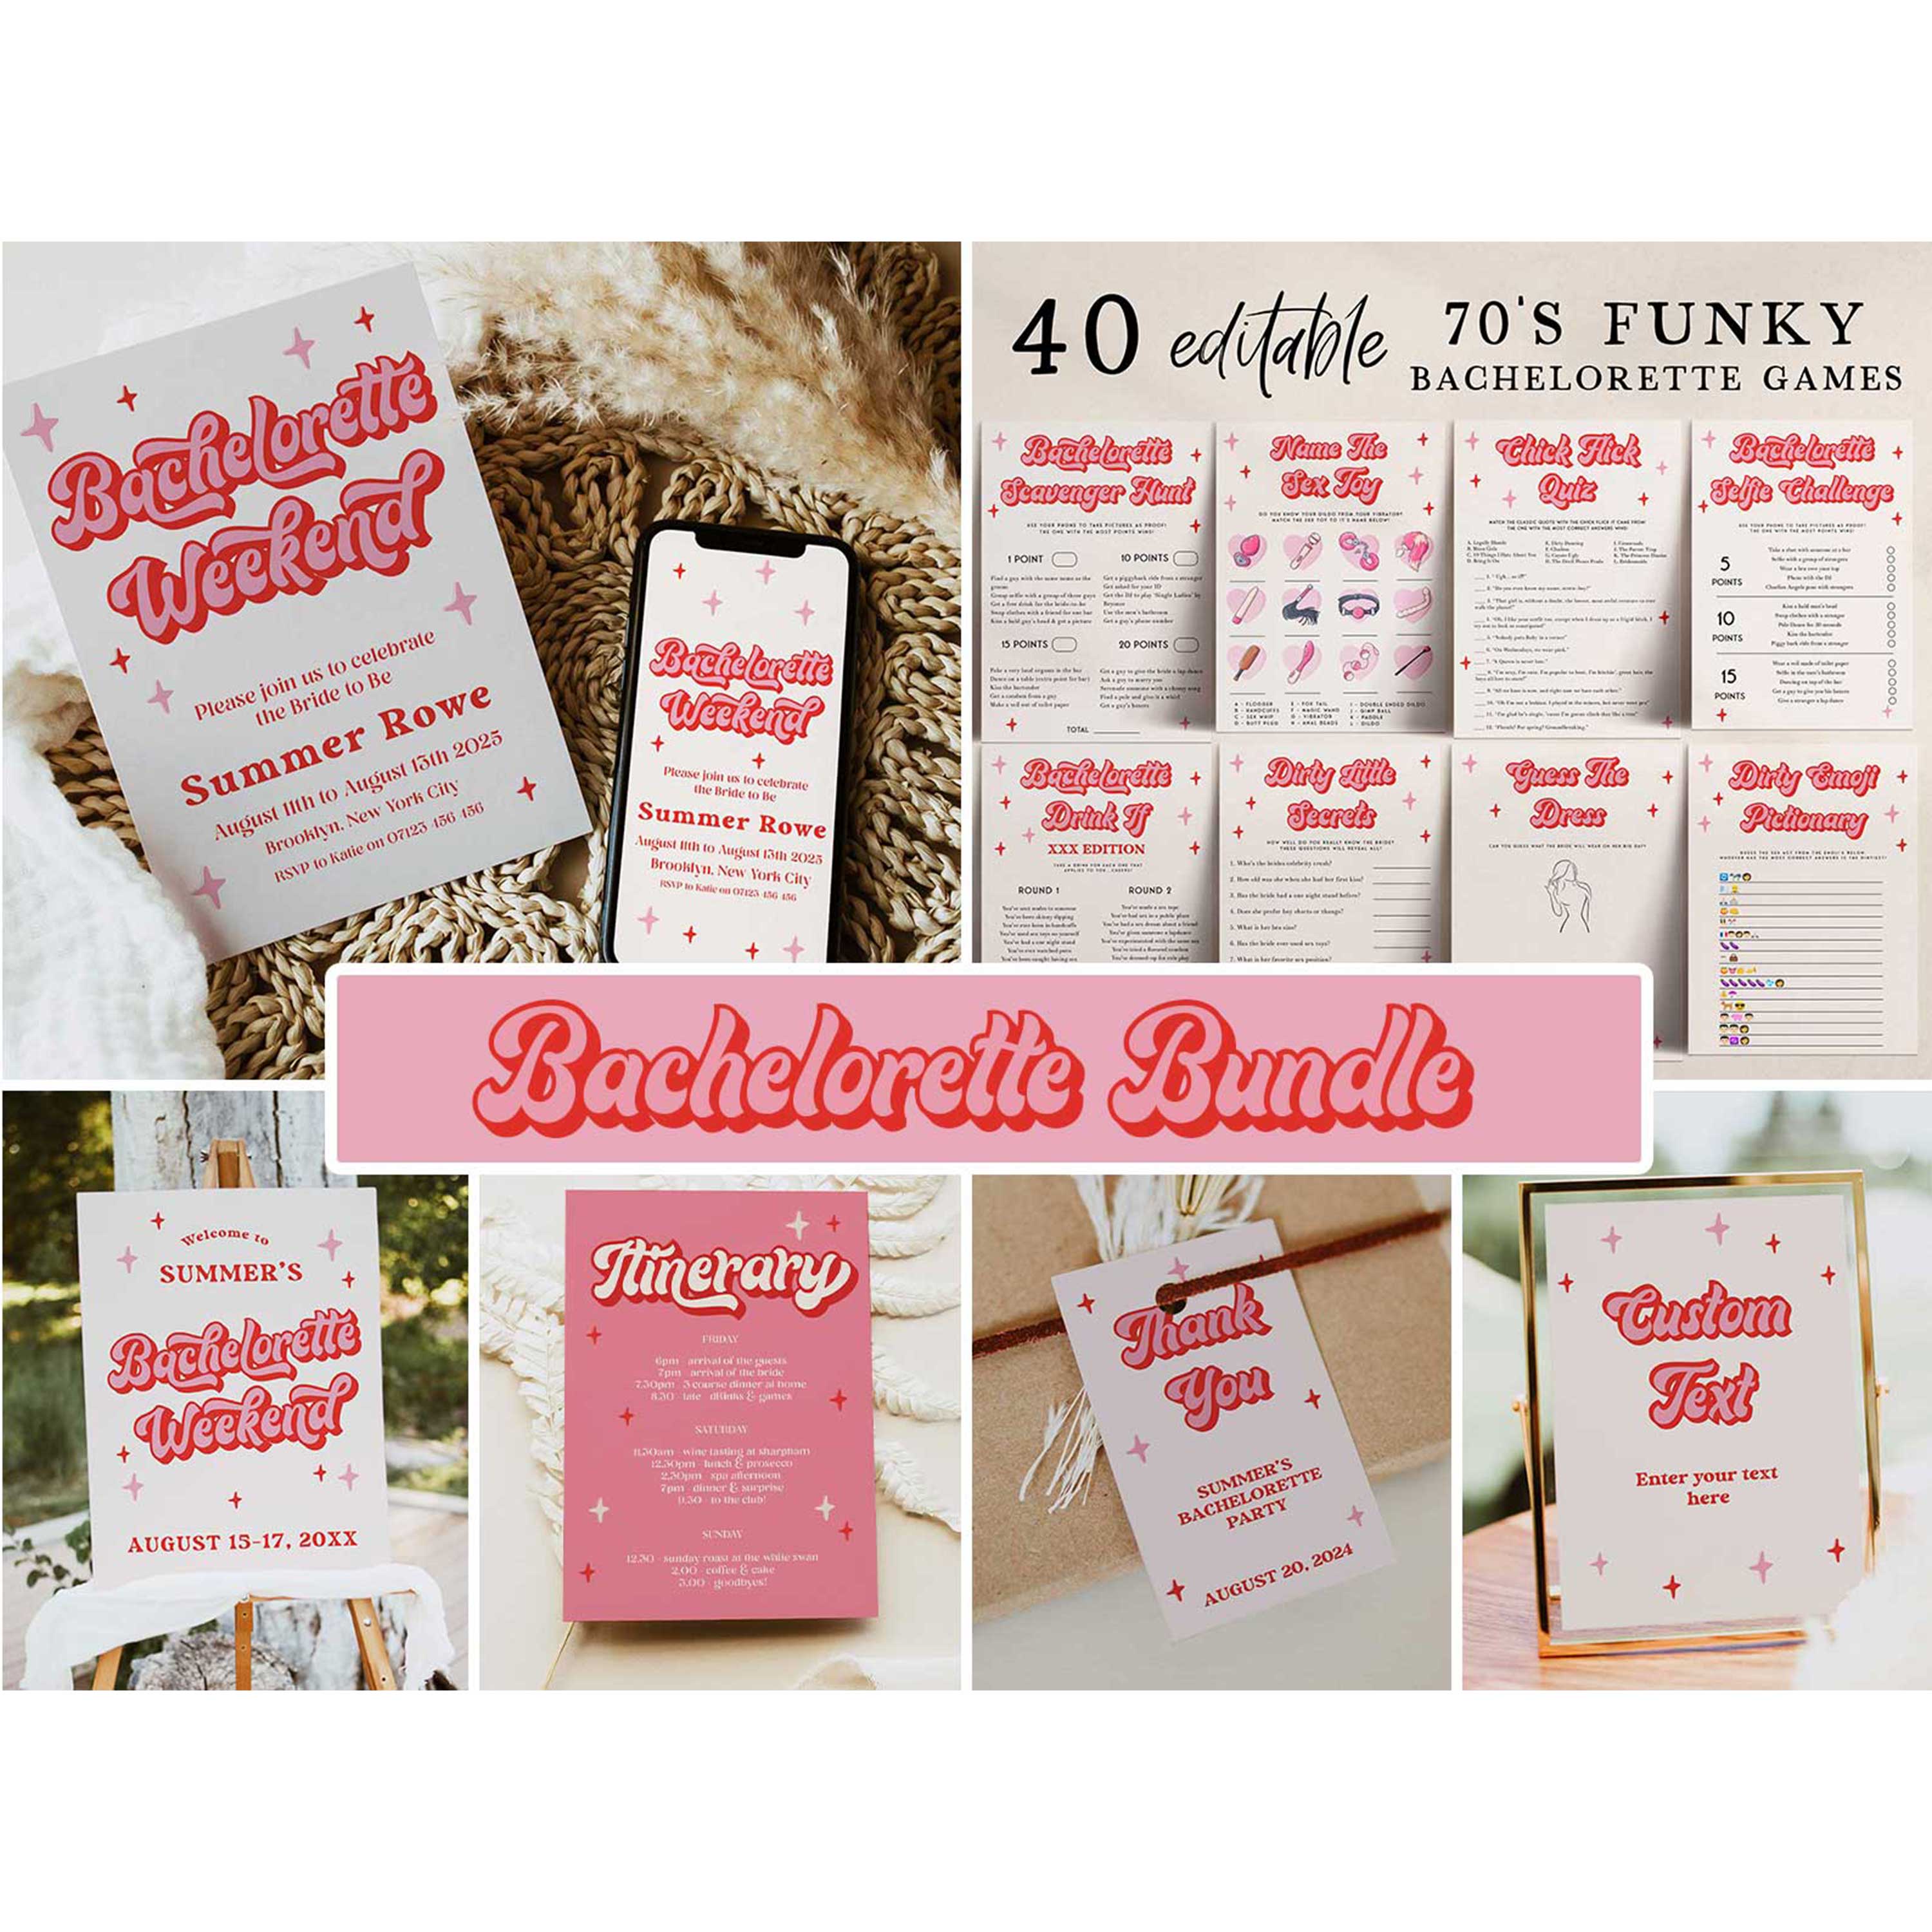 Retro 70s bachelorette party bundle including 40 editable games, invitations, and welcome signs